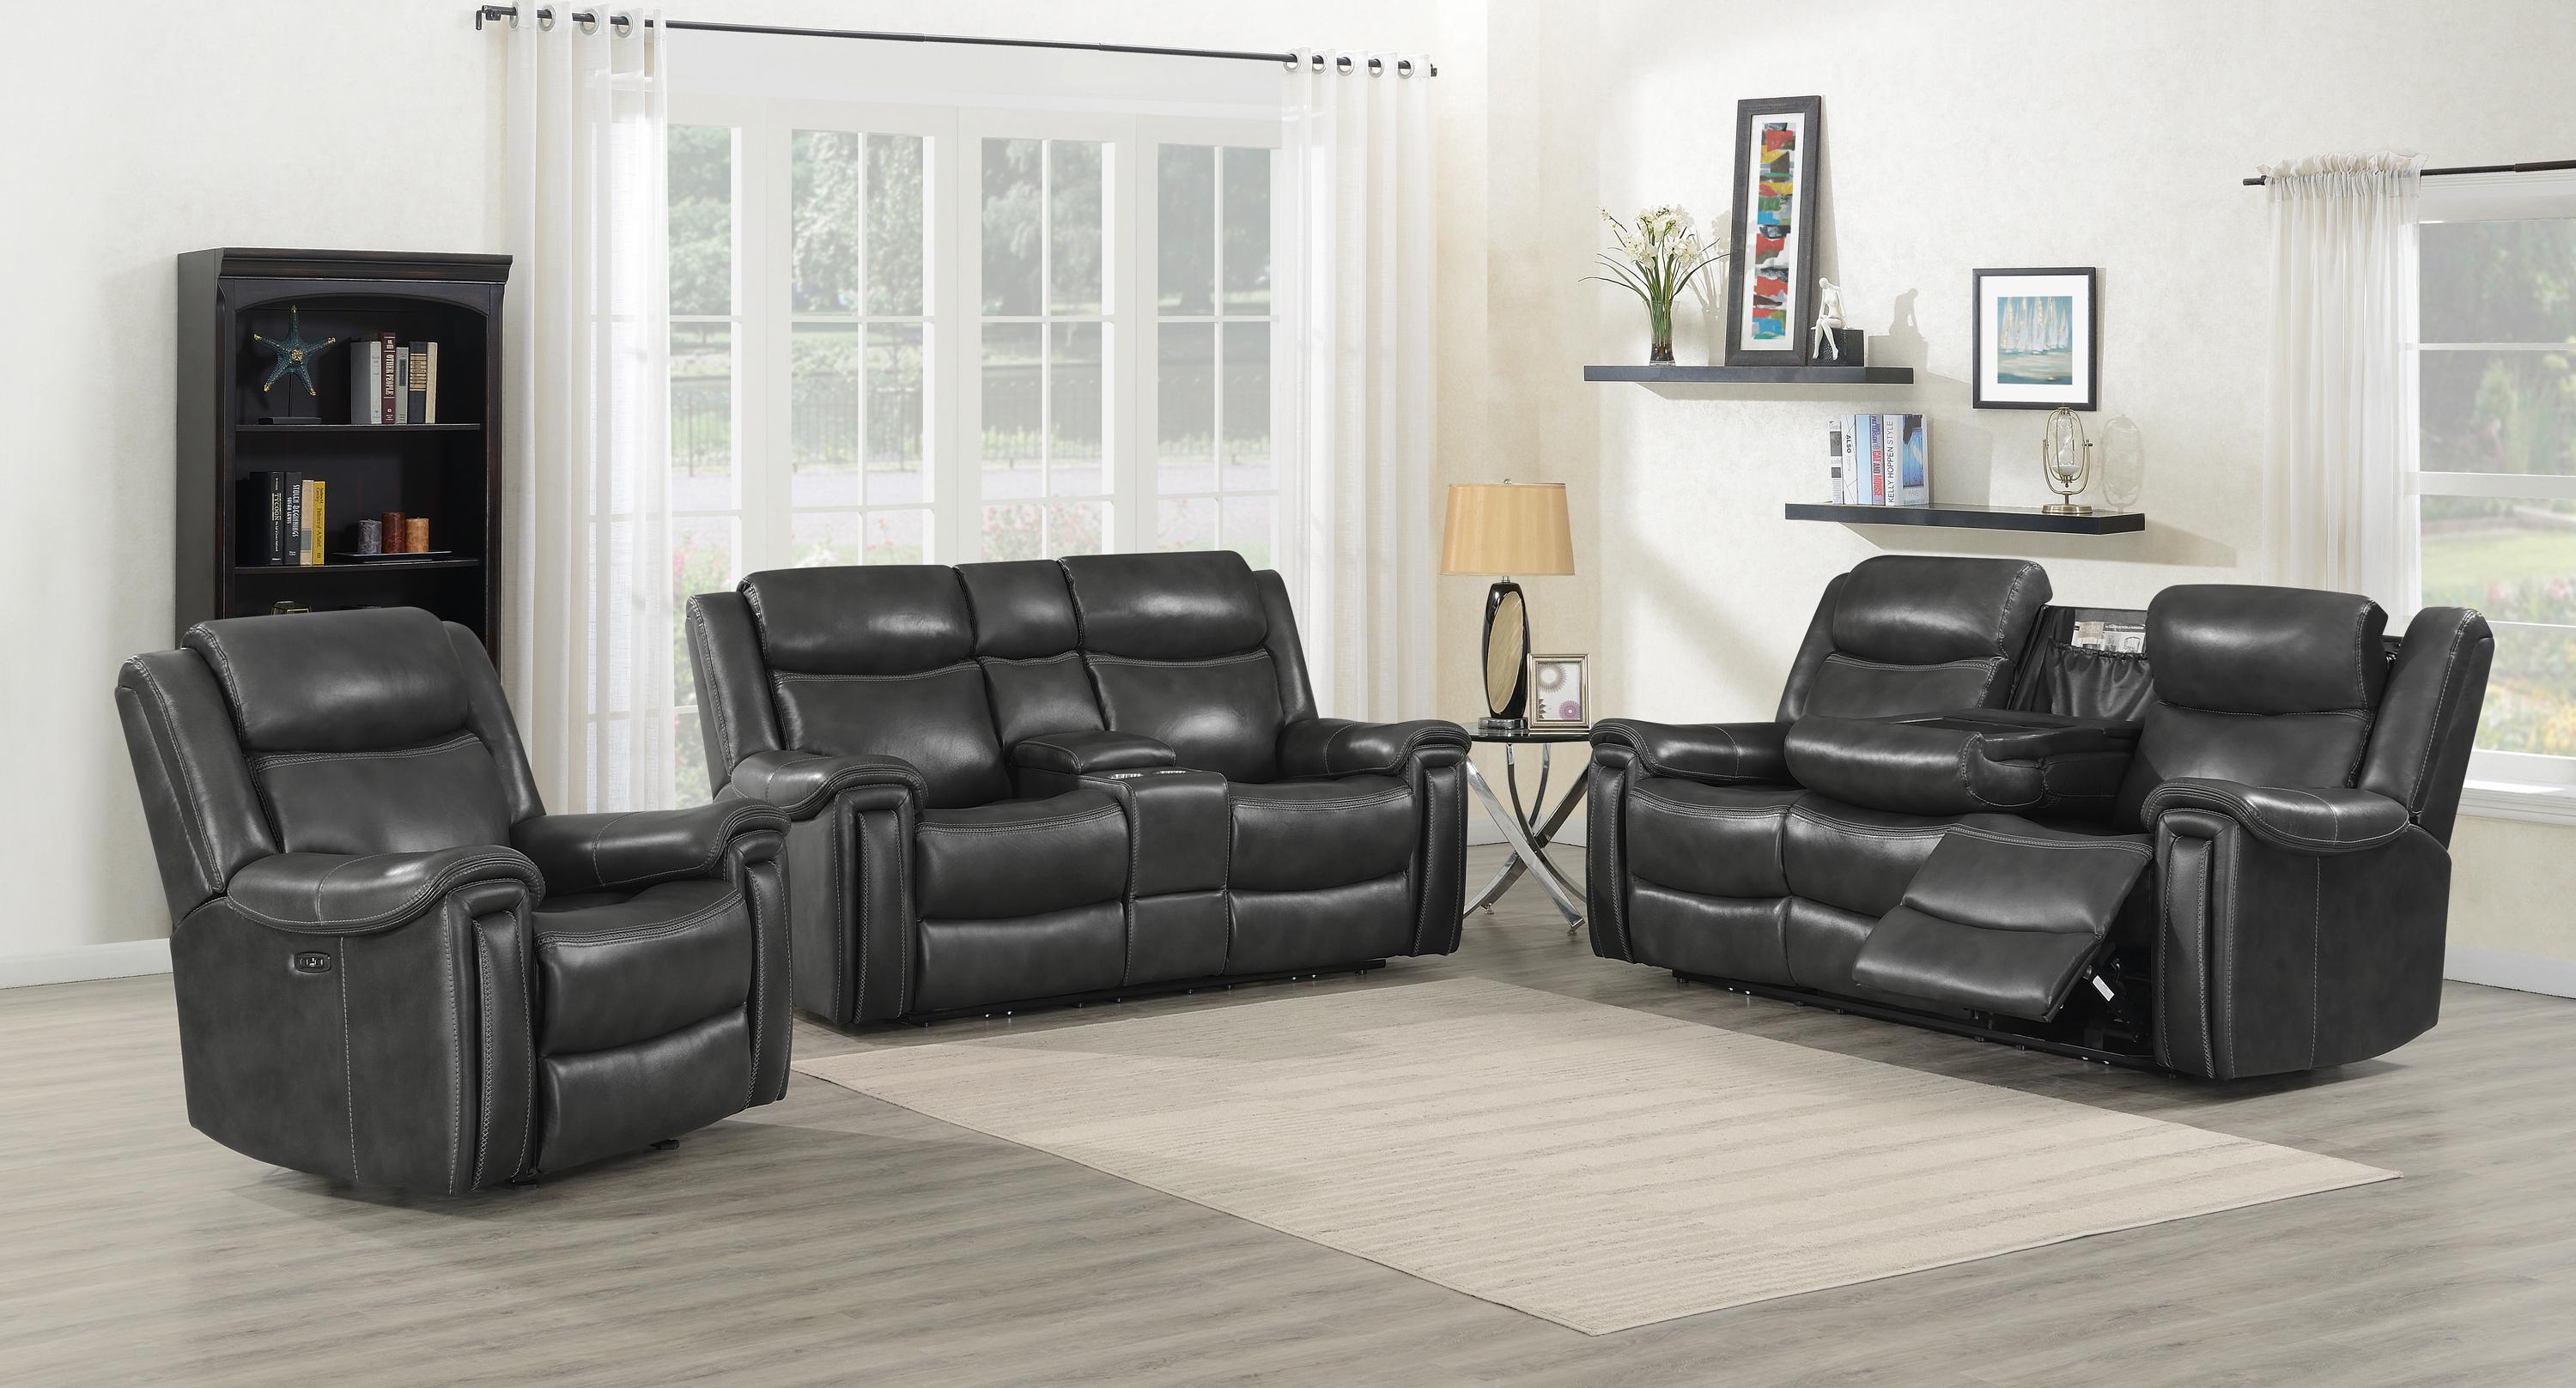 

    
Transitional Hand Rubbed Charcoal Leather Power Sofa Set 3pcs Coaster 609321PPI-S3 Shallowford
